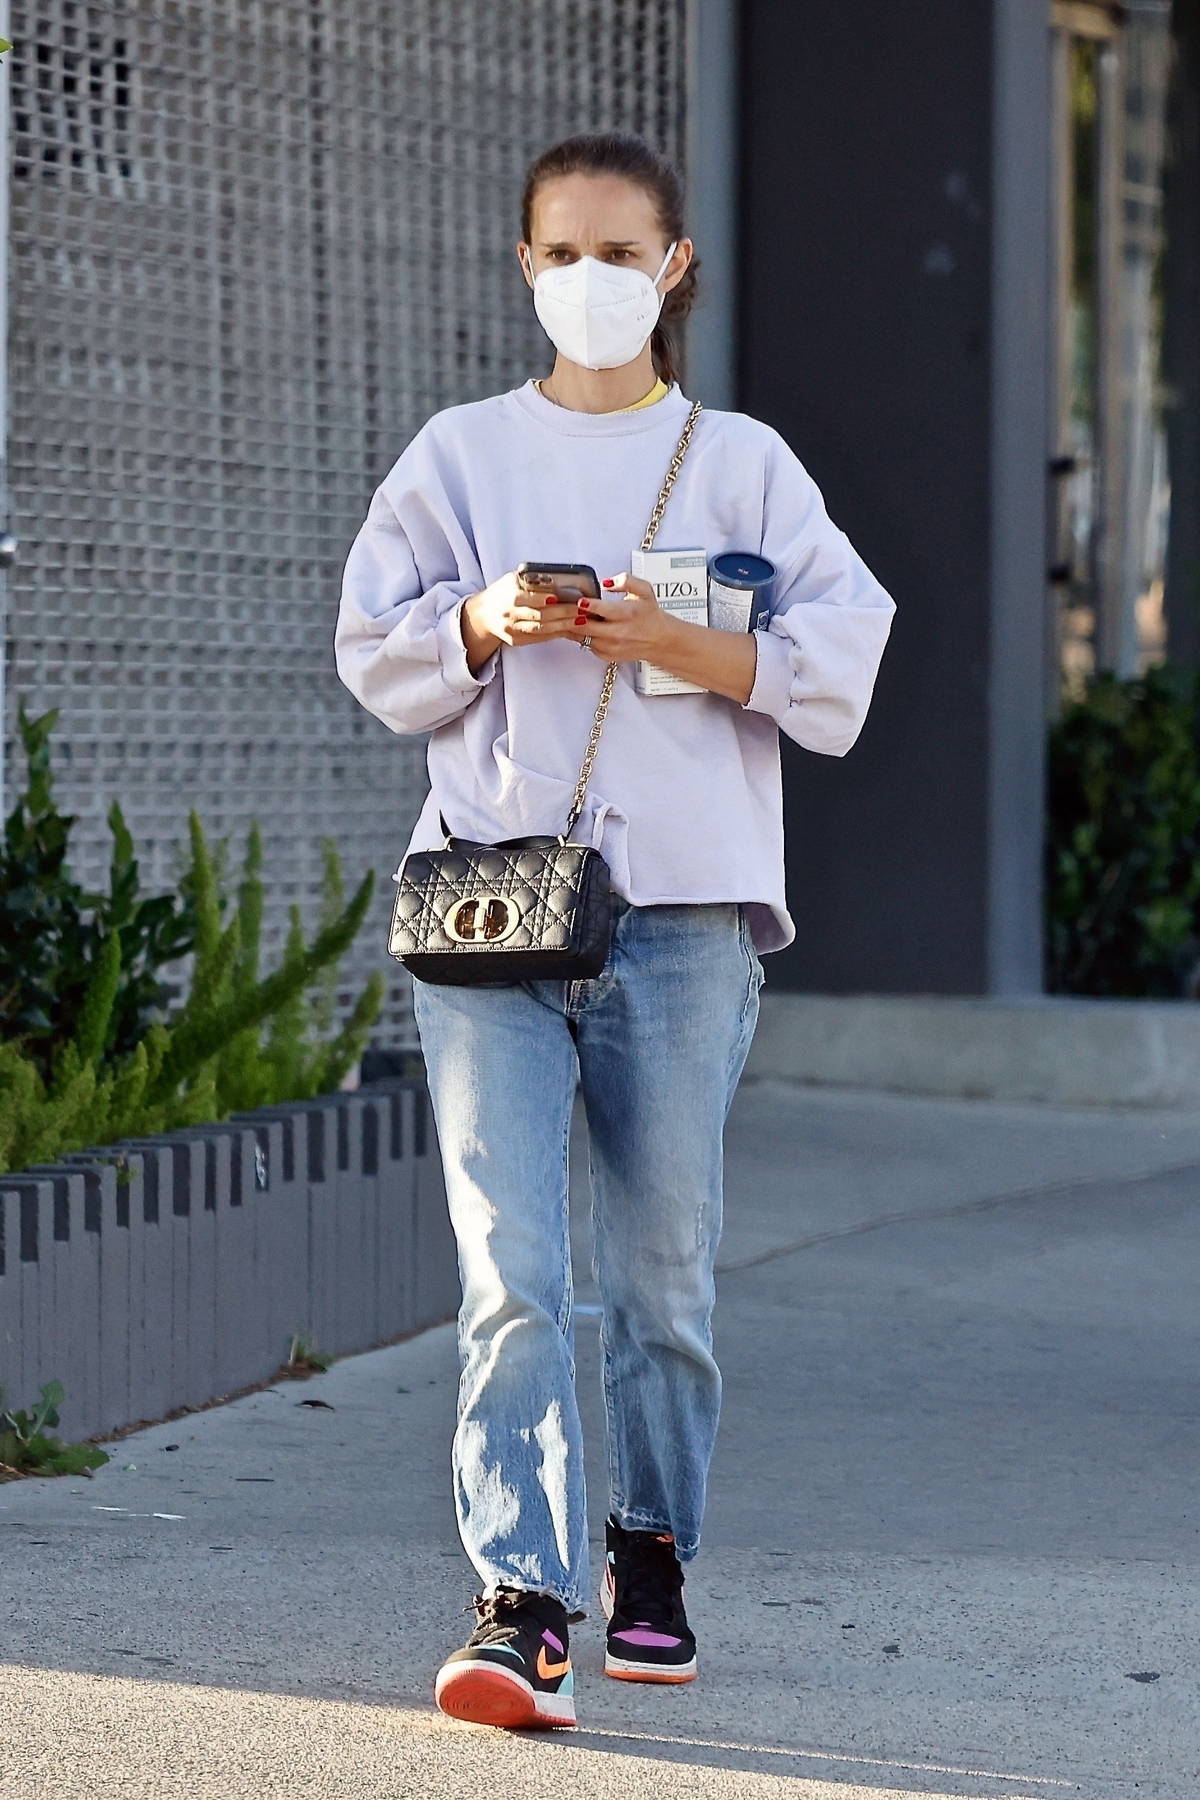 Sweatshirts and Boyfriend Jeans : Comfort Fashion - FASHION AND FRAPPES %